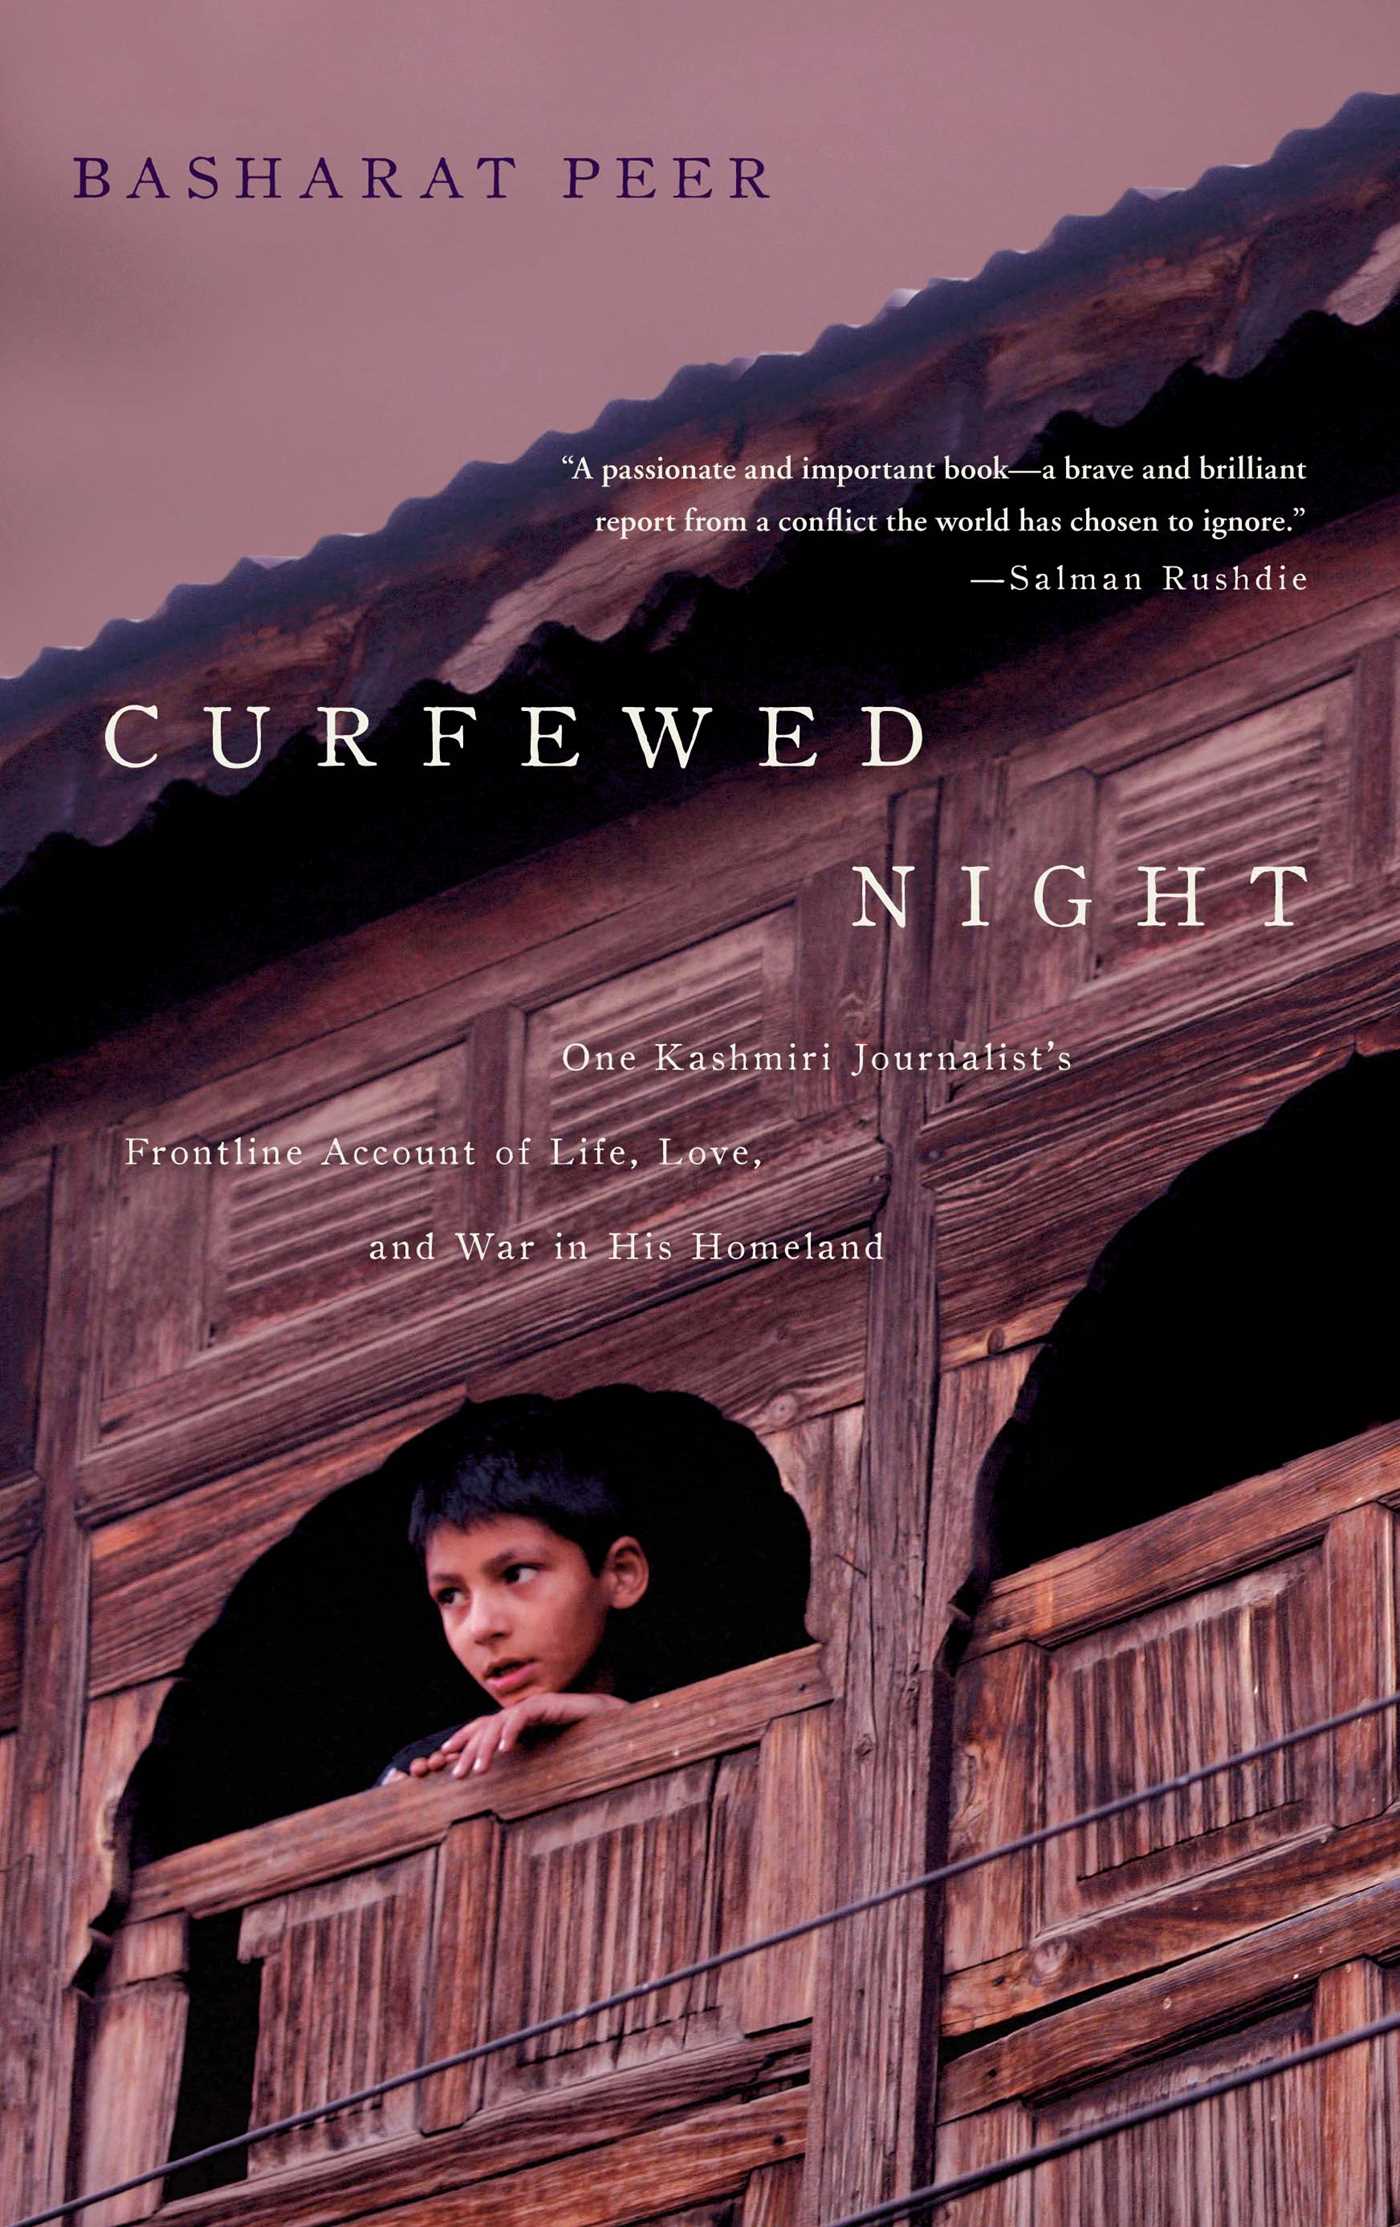 Curfewed Night | Book by Basharat Peer | Official Publisher Page ...